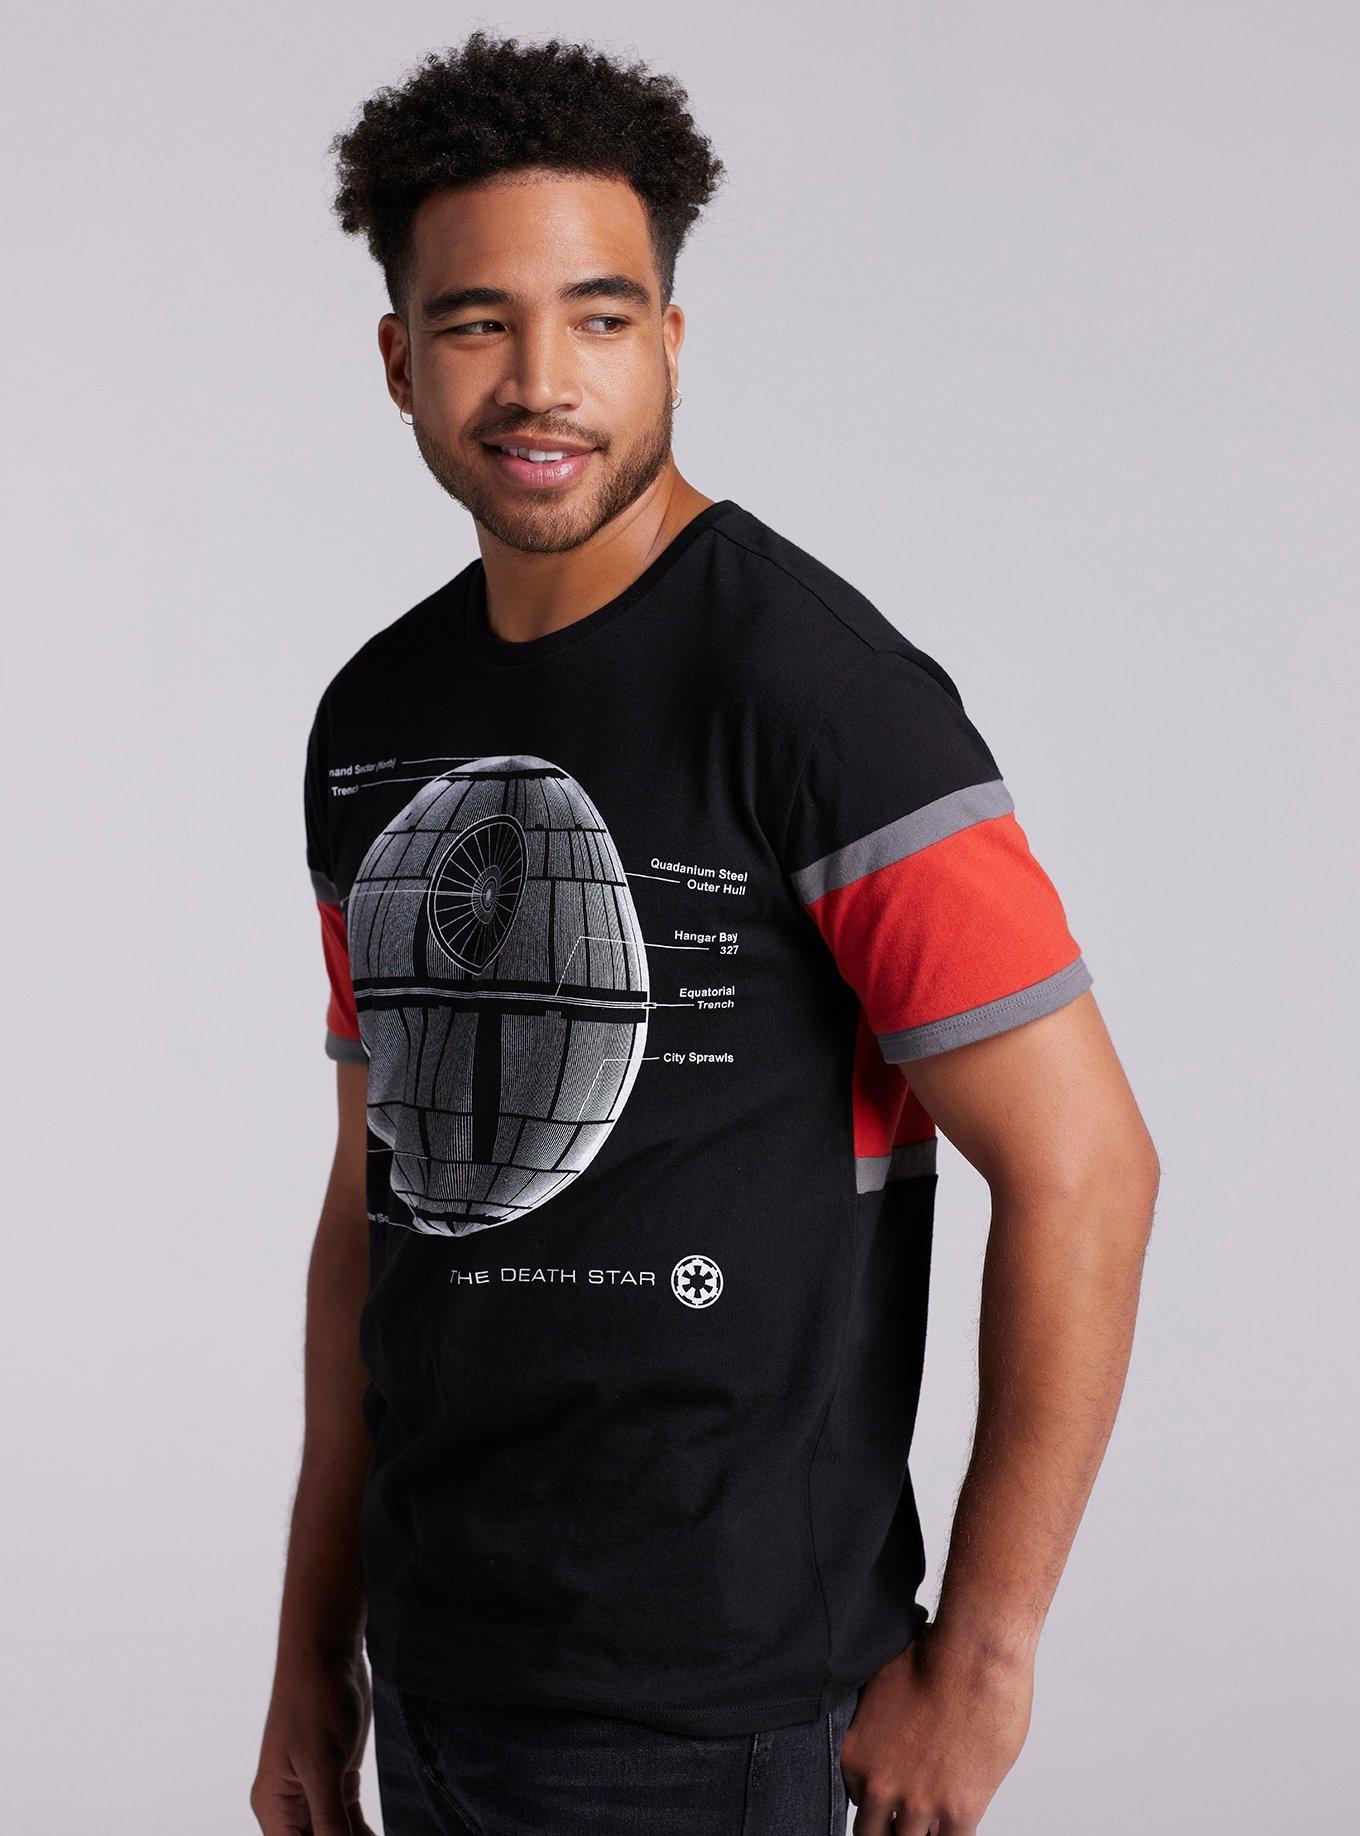 Our Universe Star Wars Death Star T-Shirt Our Universe Exclusive